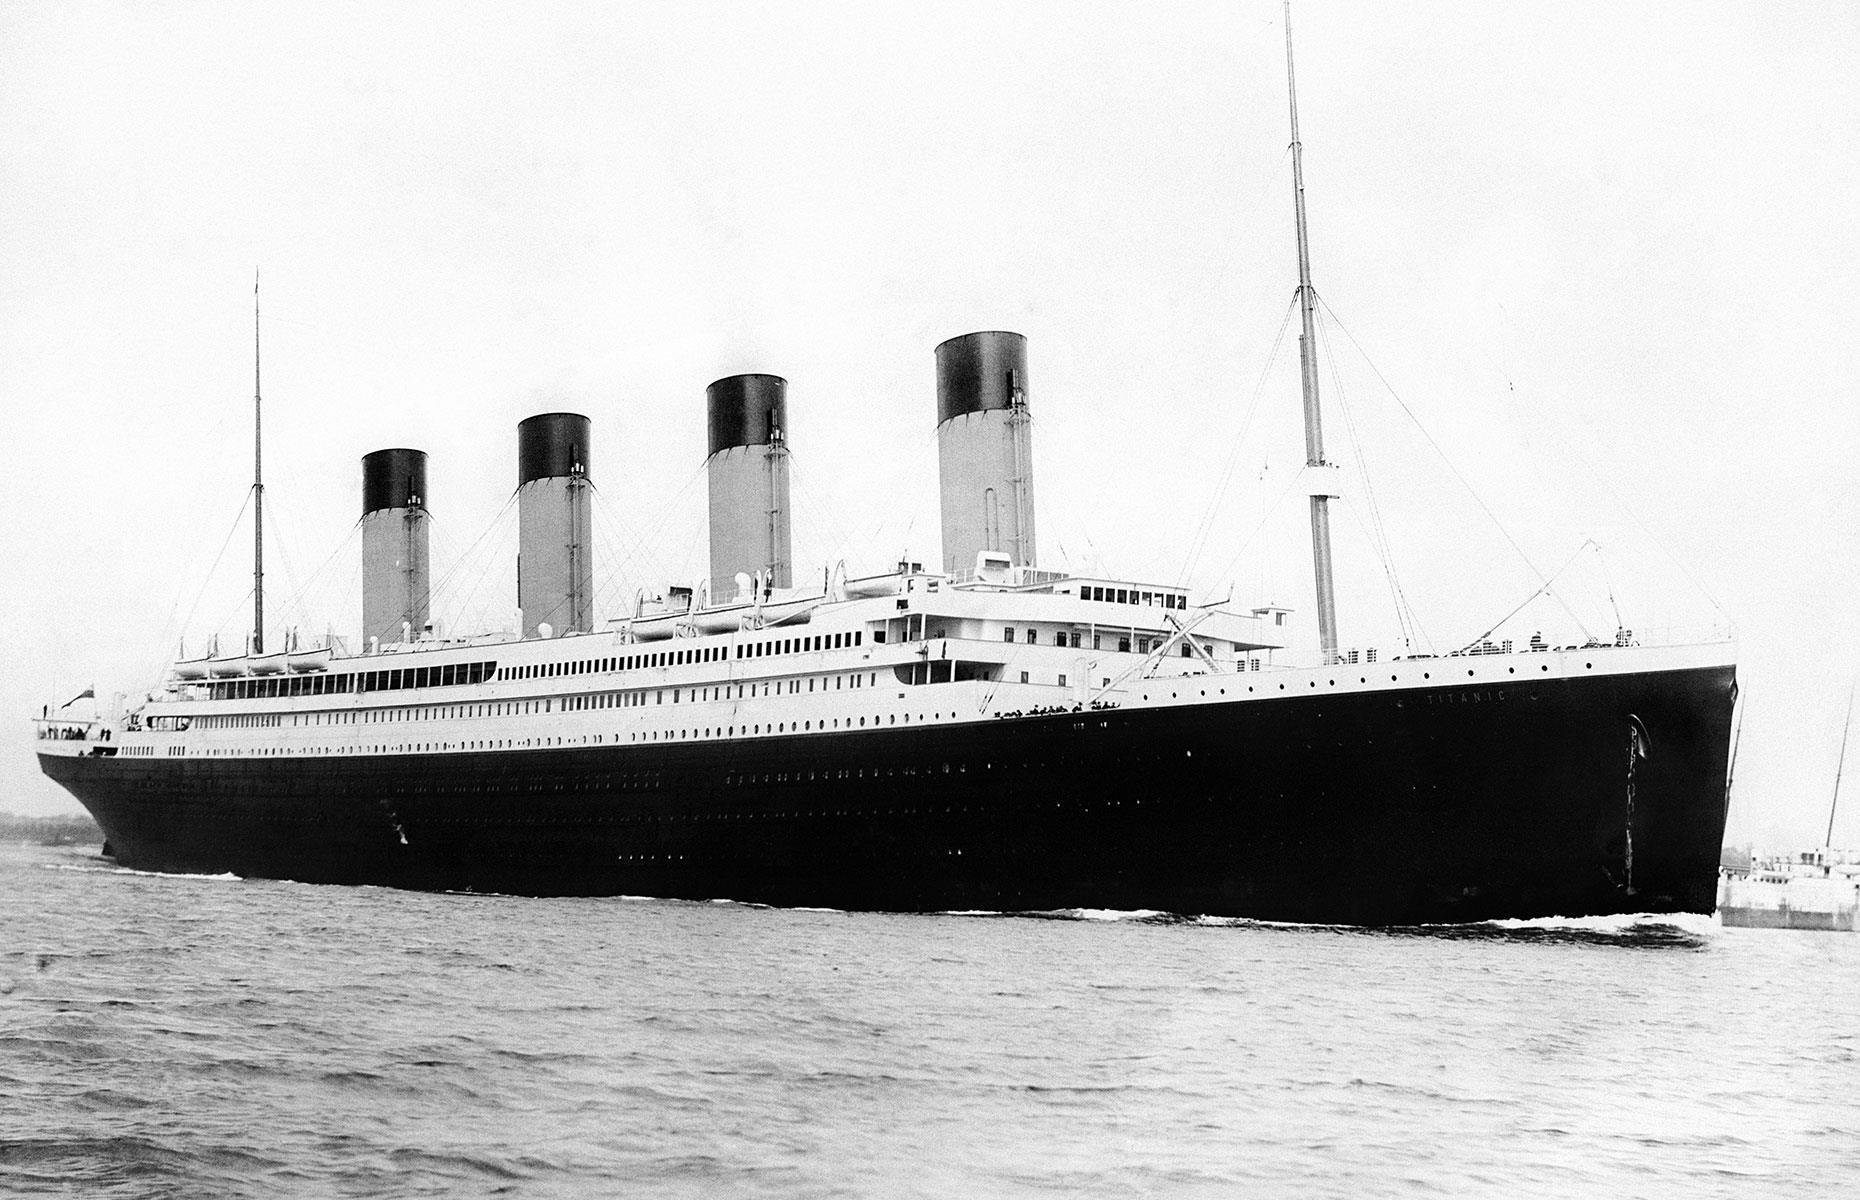 <p>One of the most famous and devastating events in cruise history occurred in this decade. Dubbed "unsinkable" by the White Star Line's vice-president, the Titanic set out from Southampton on her maiden voyage on 10 April 1912 to much applause. But just four days later, she collided with an iceberg in the North Atlantic: the compartments in her hull filled with water and she tragically sank. The disaster claimed the lives of more than 1,500 people.</p>  <p><strong><a href="https://www.loveexploring.com/gallerylist/72633/secrets-of-the-titanic-life-onboard-the-worlds-most-famous-ship">We reveal the secrets of life onboard the Titanic</a></strong></p>